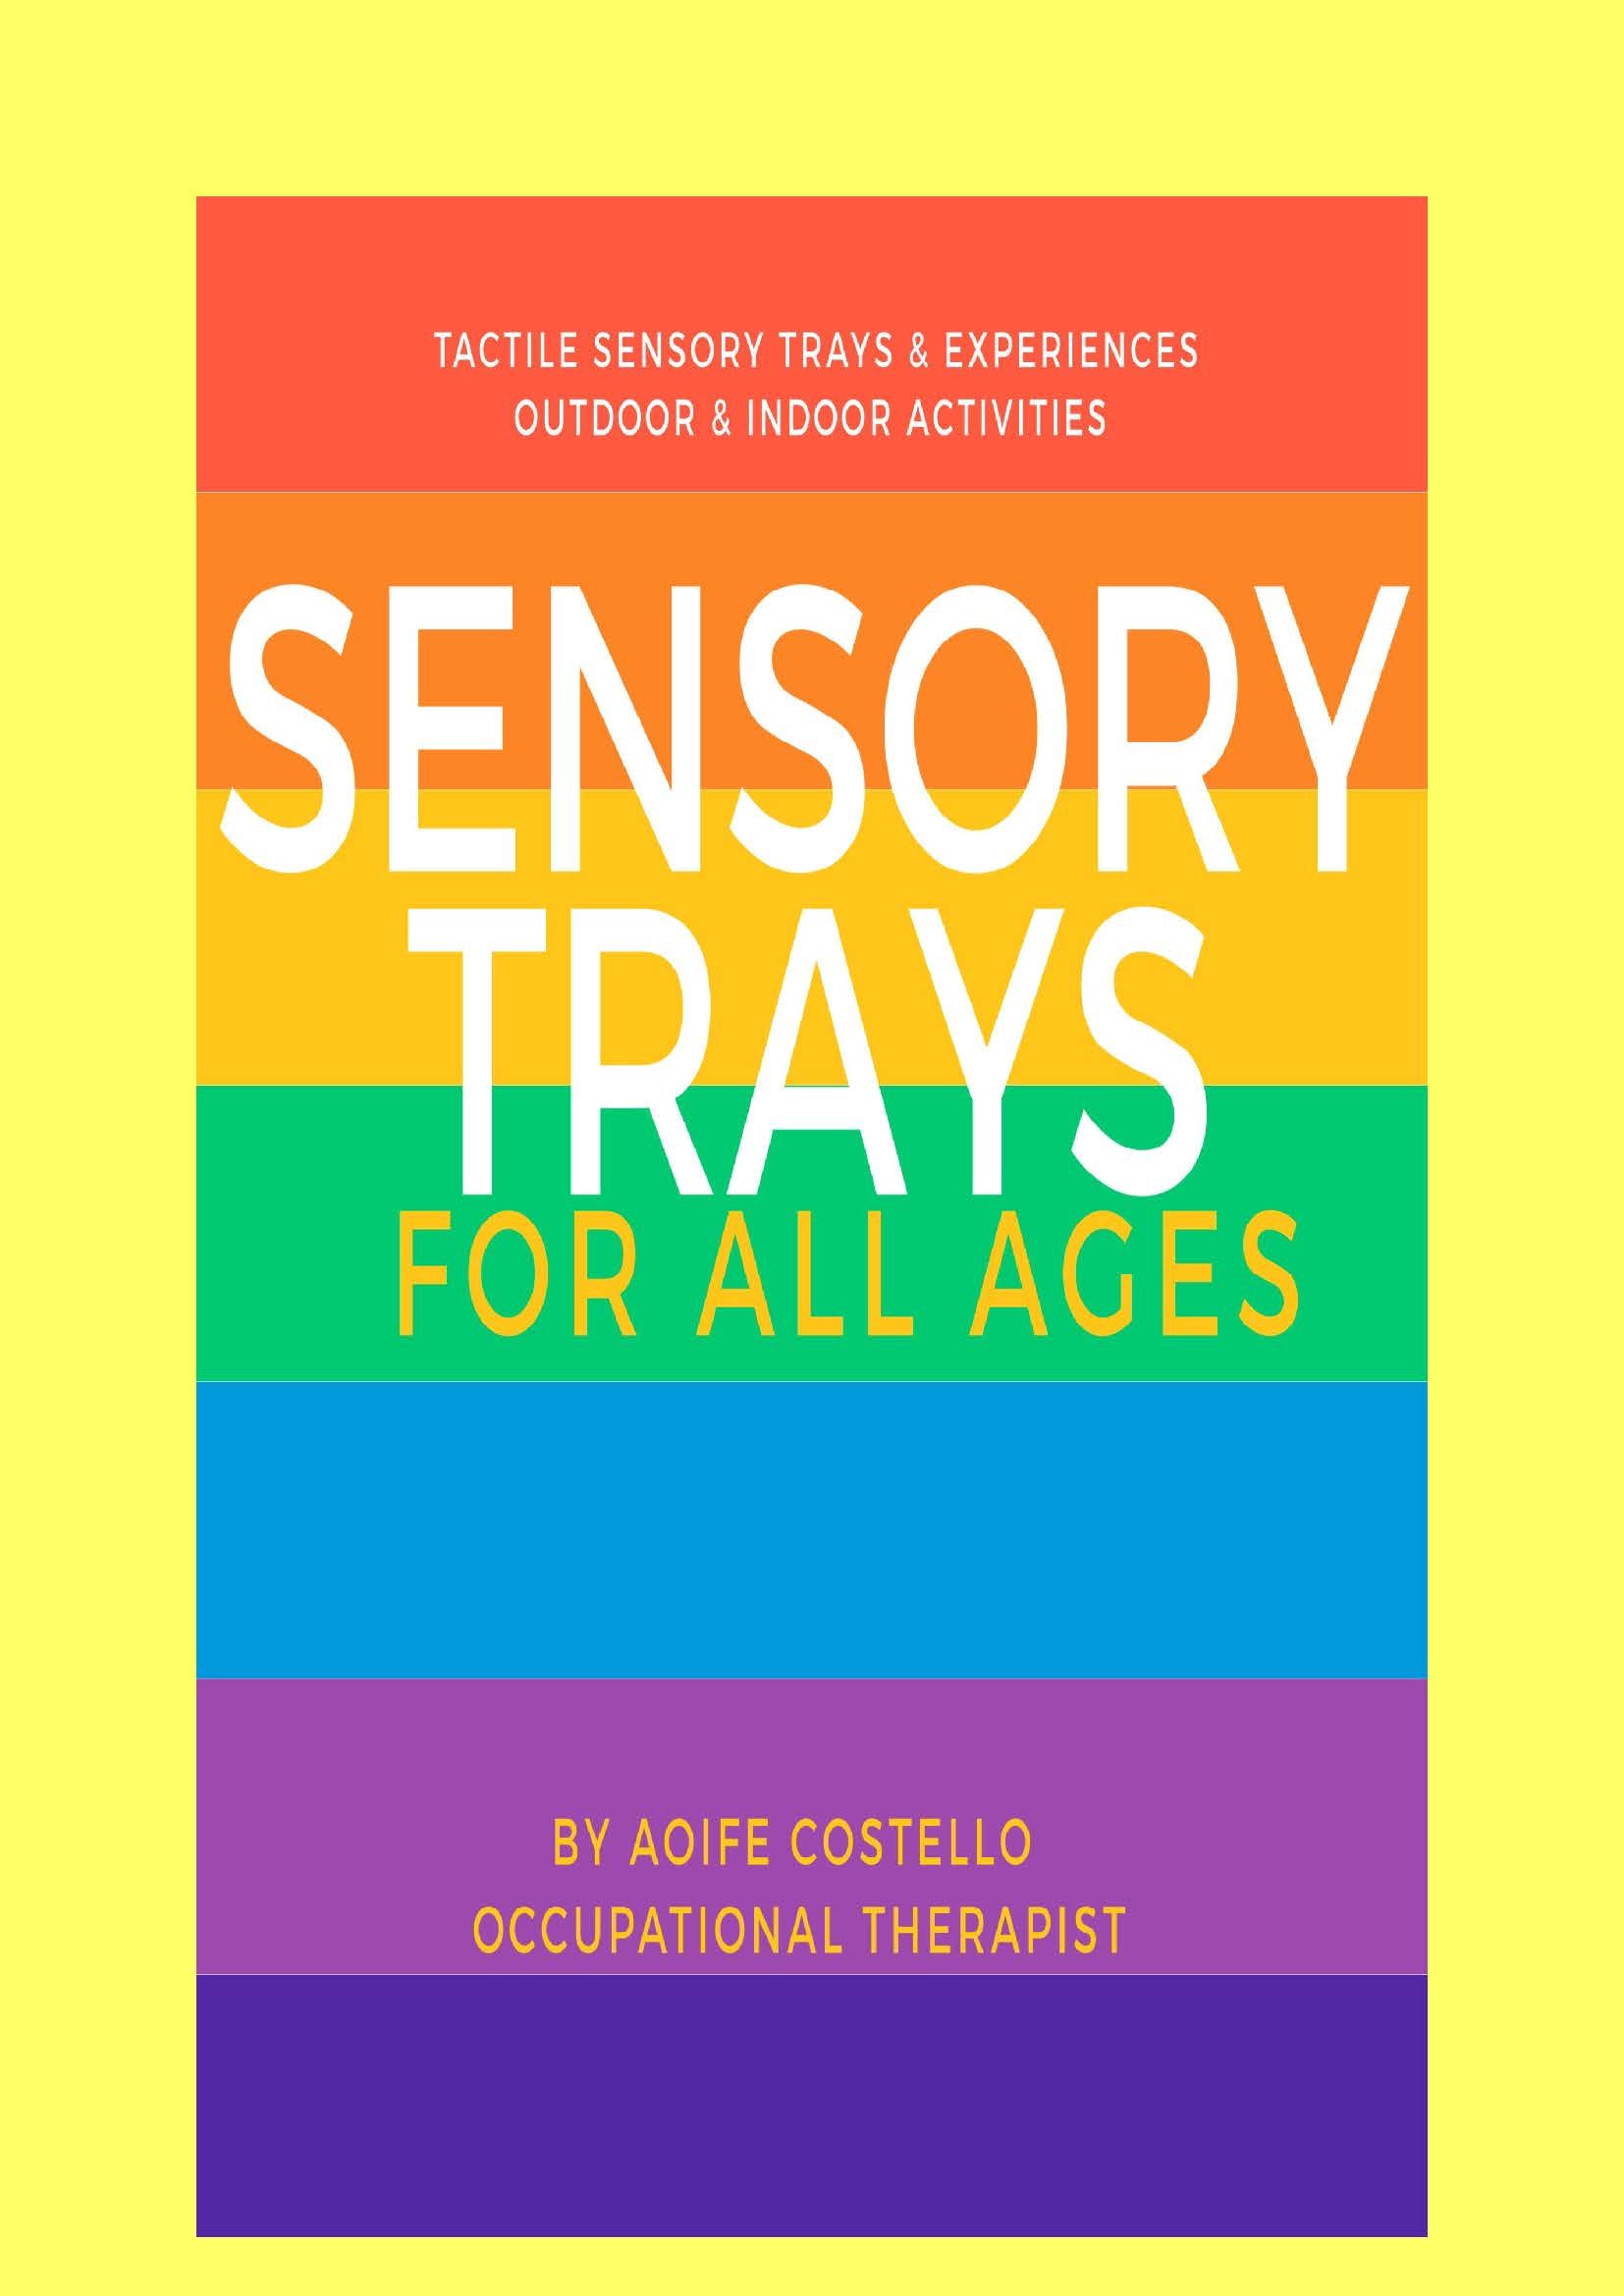 Sensory Trays For All Ages